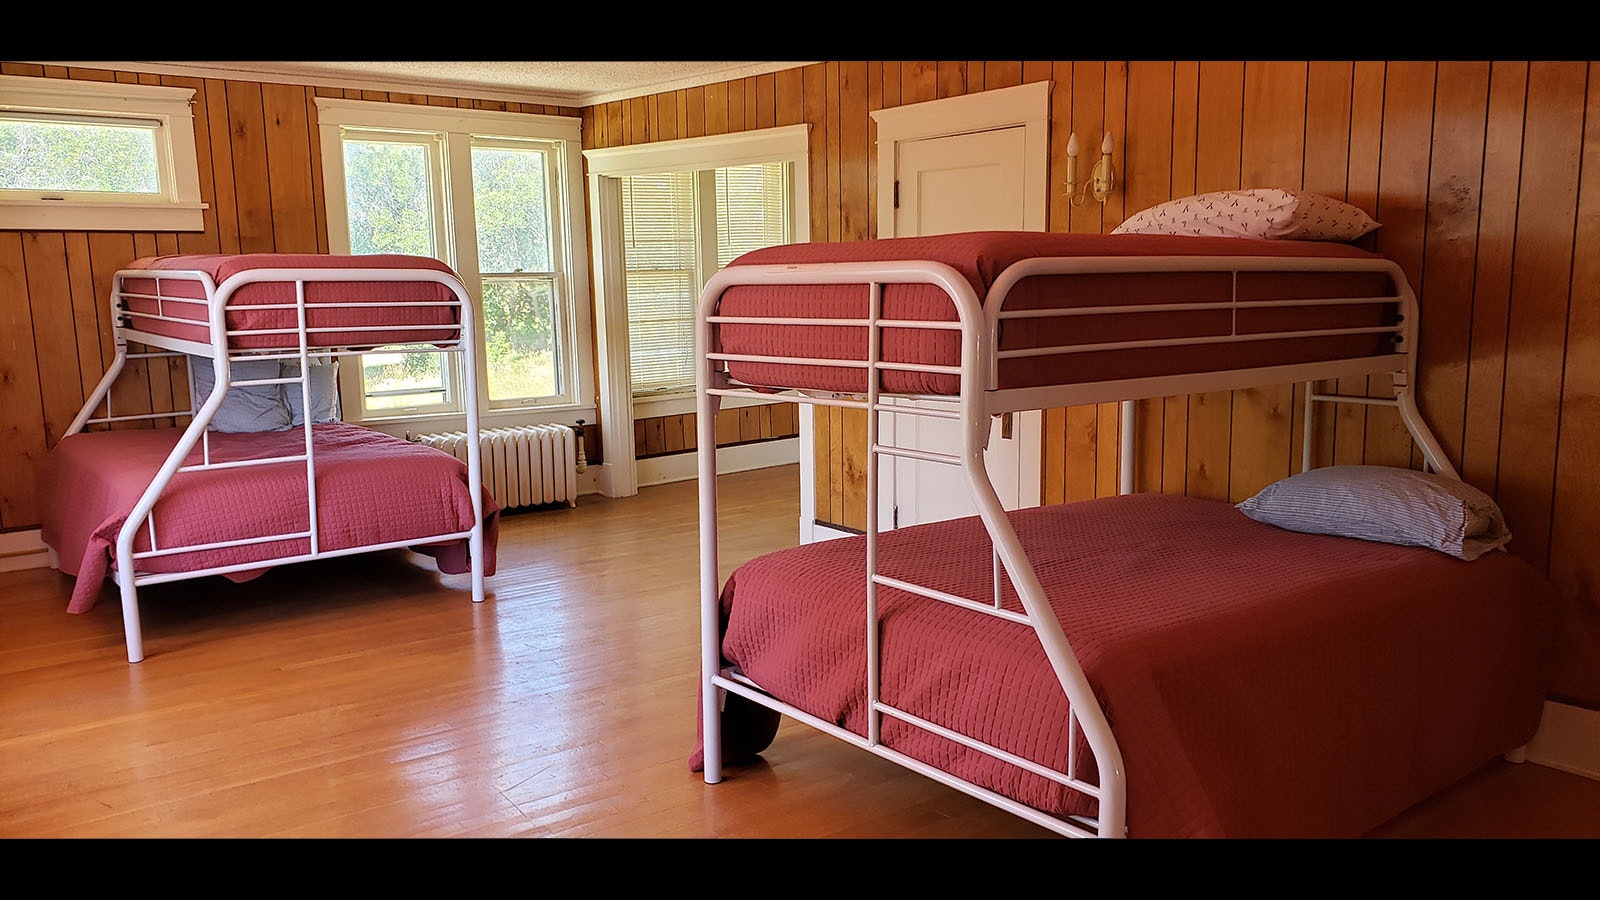 The upstairs bedrooms all have bunk beds in them for now and are serving as dormitory space for workshops.